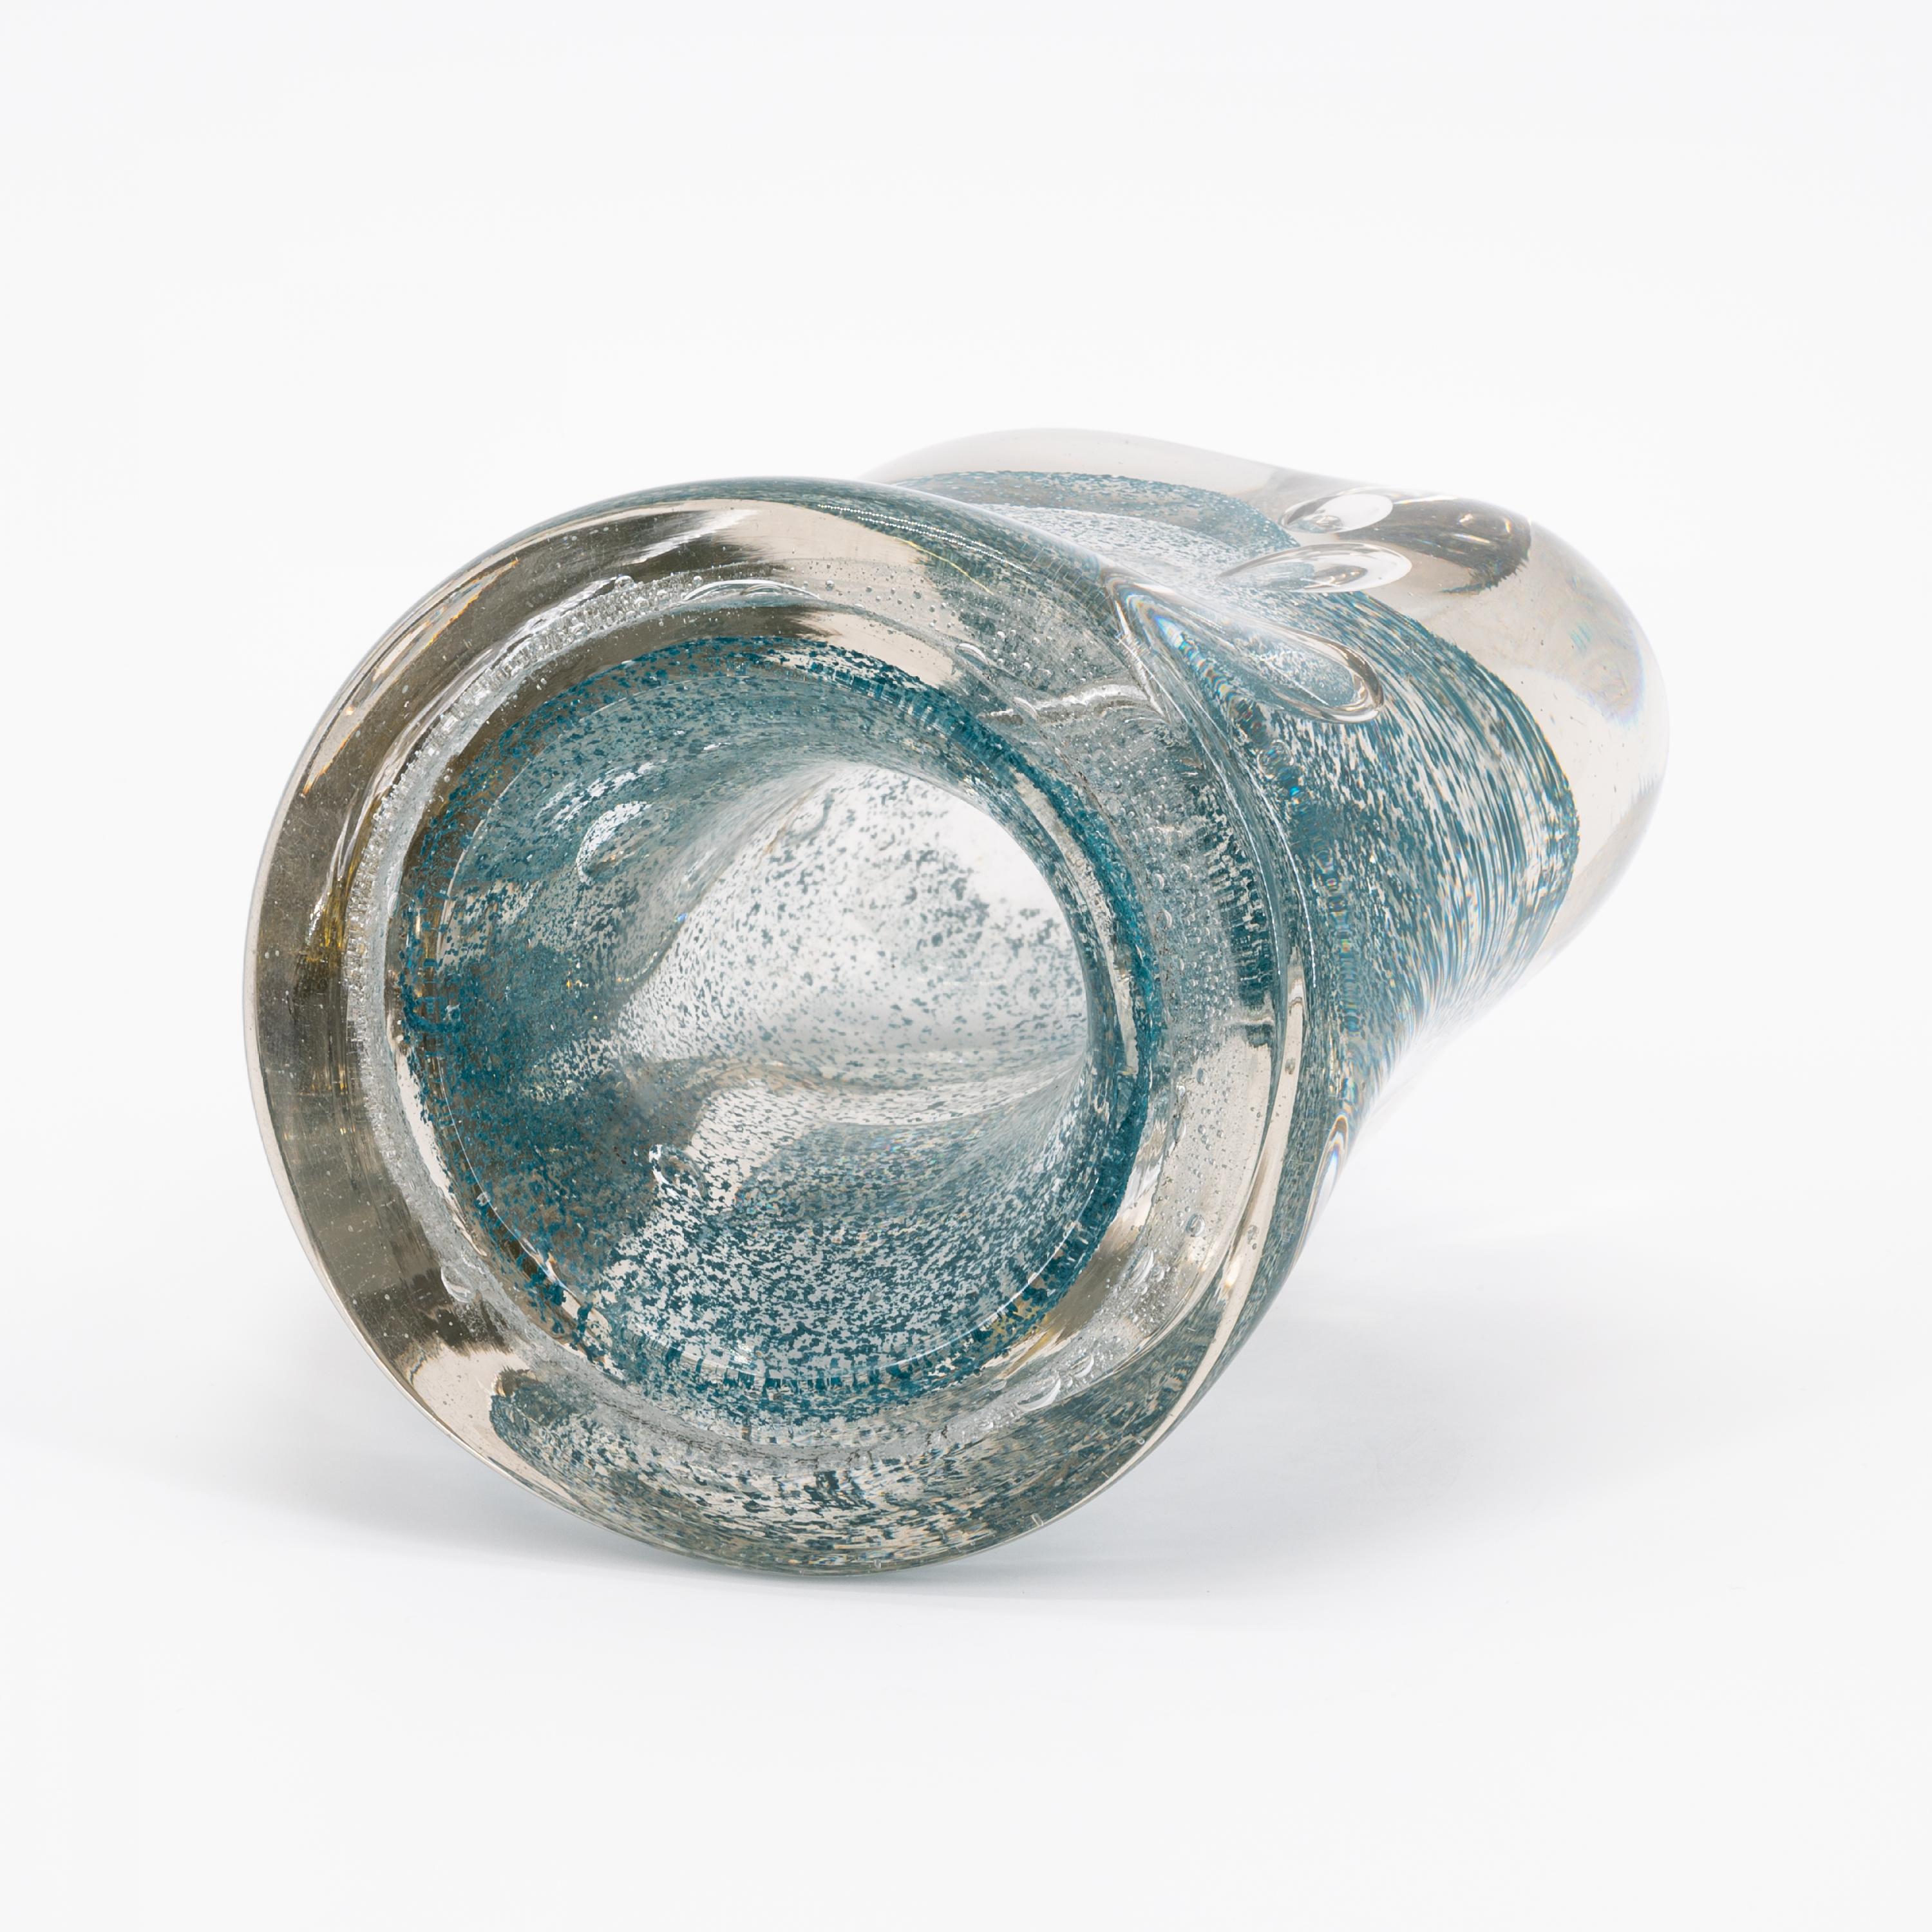 GLASS VASE WITH TURQUOISE BLUE POWDER INCLUSIONS - Image 5 of 6